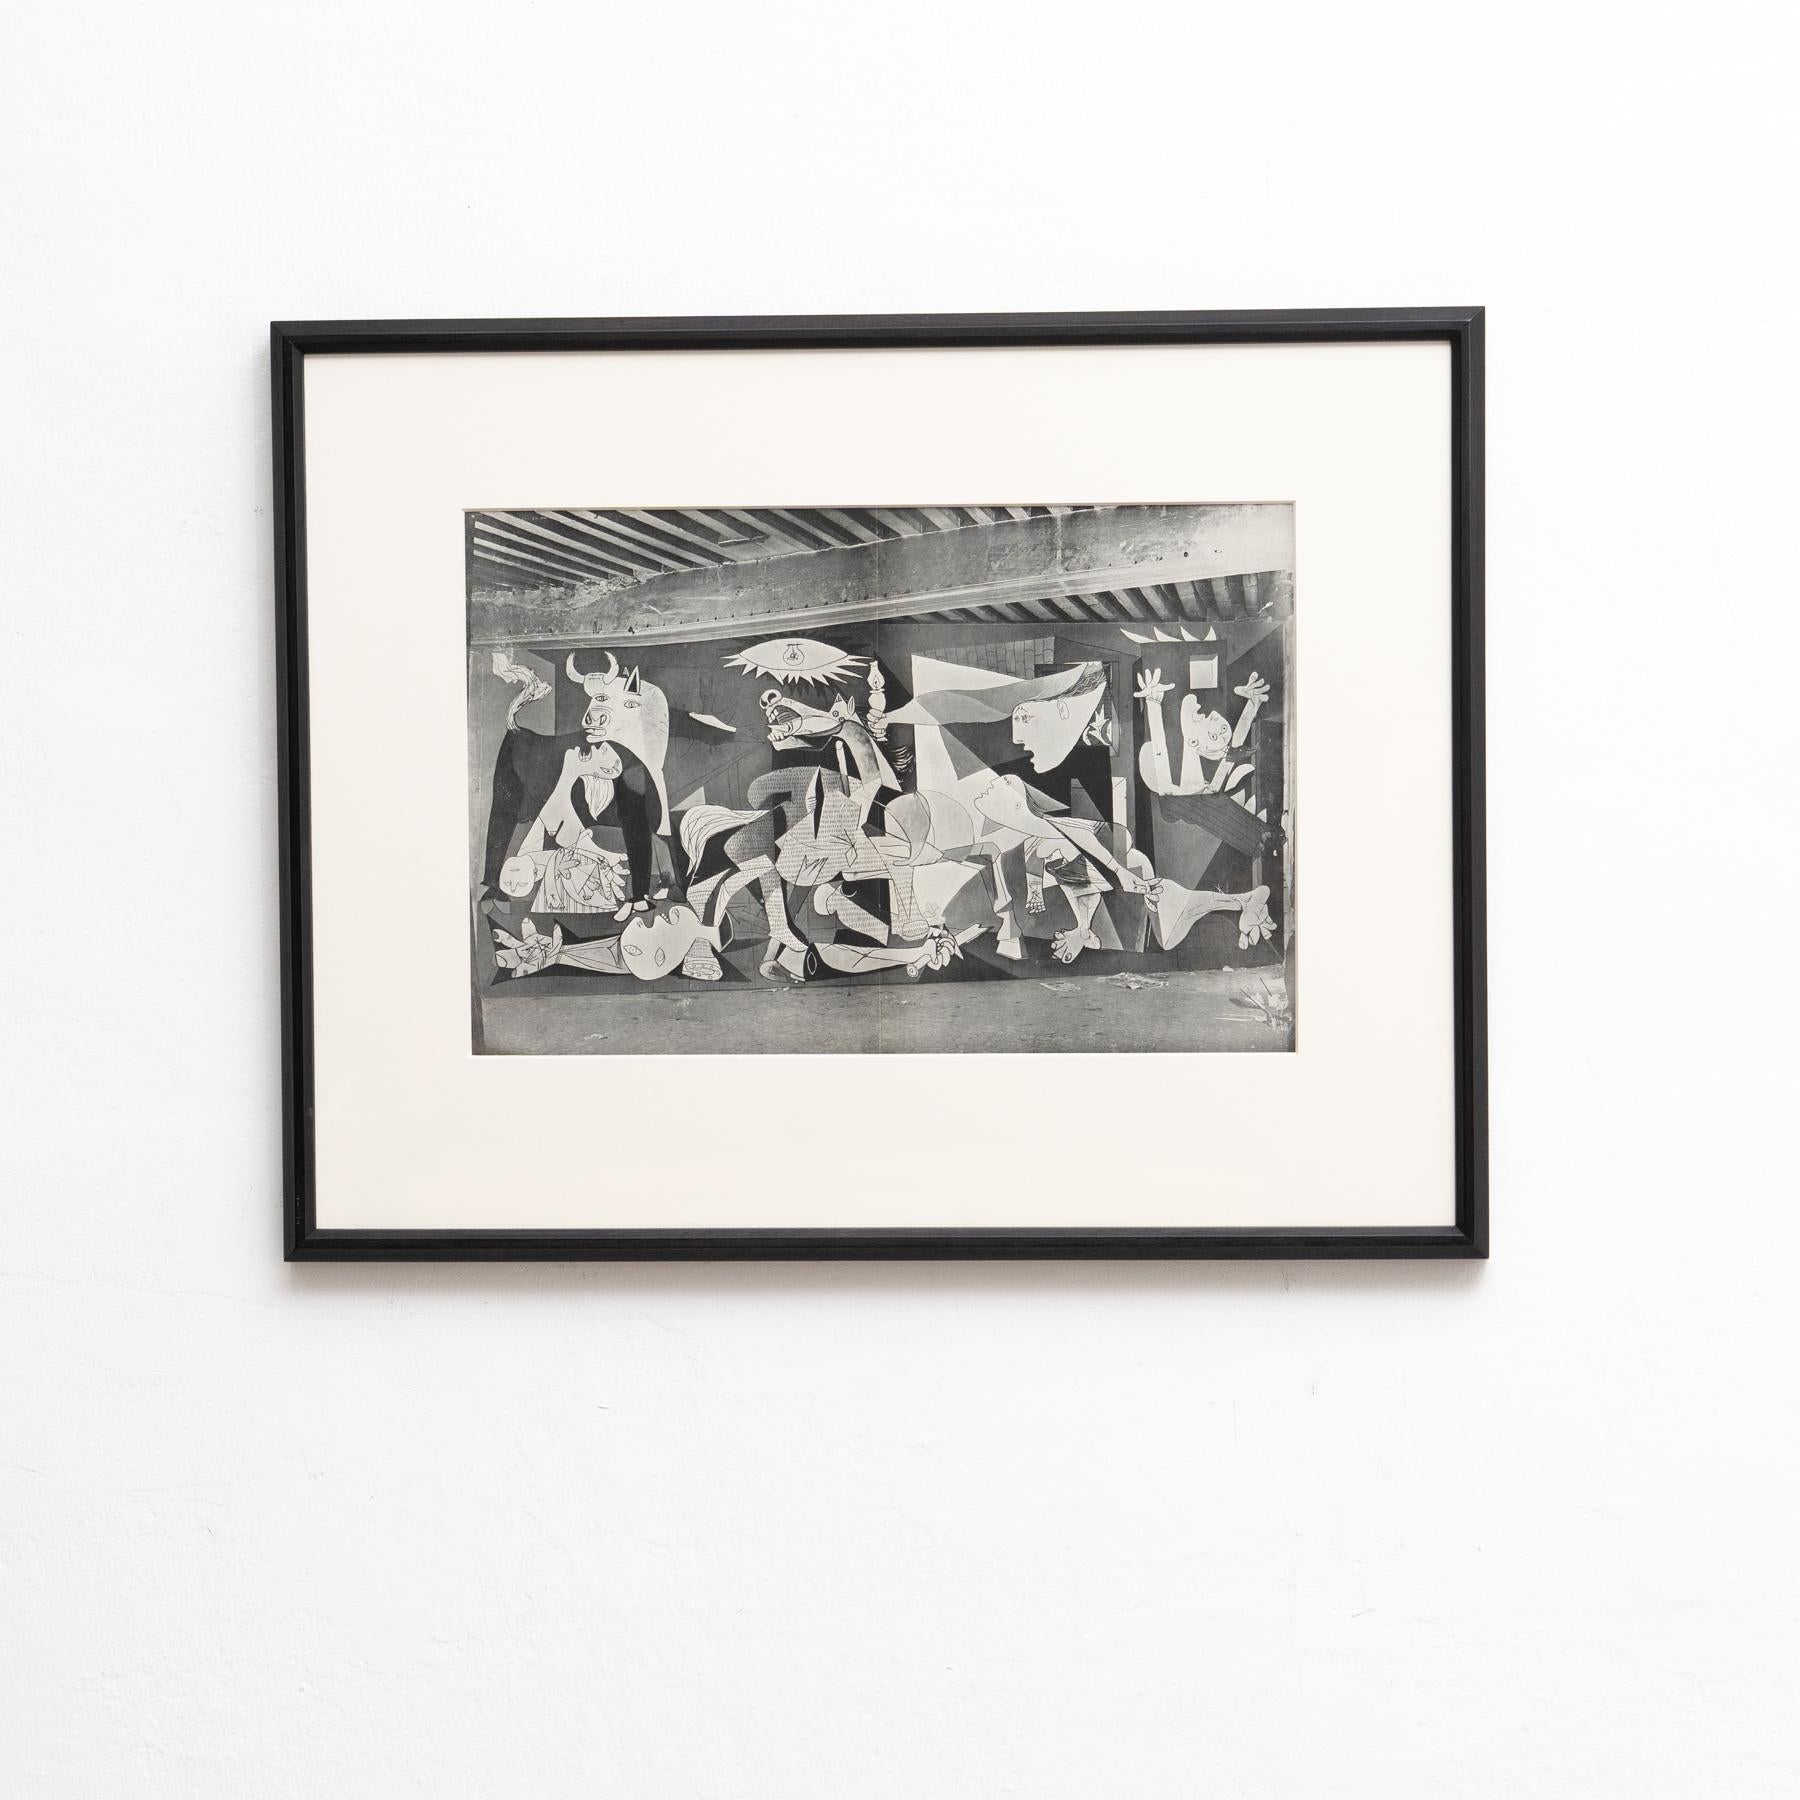 Picasso's famous Guernica painting as photographed by Dora Maar. Photogravure from the first issue of the luxury journal 